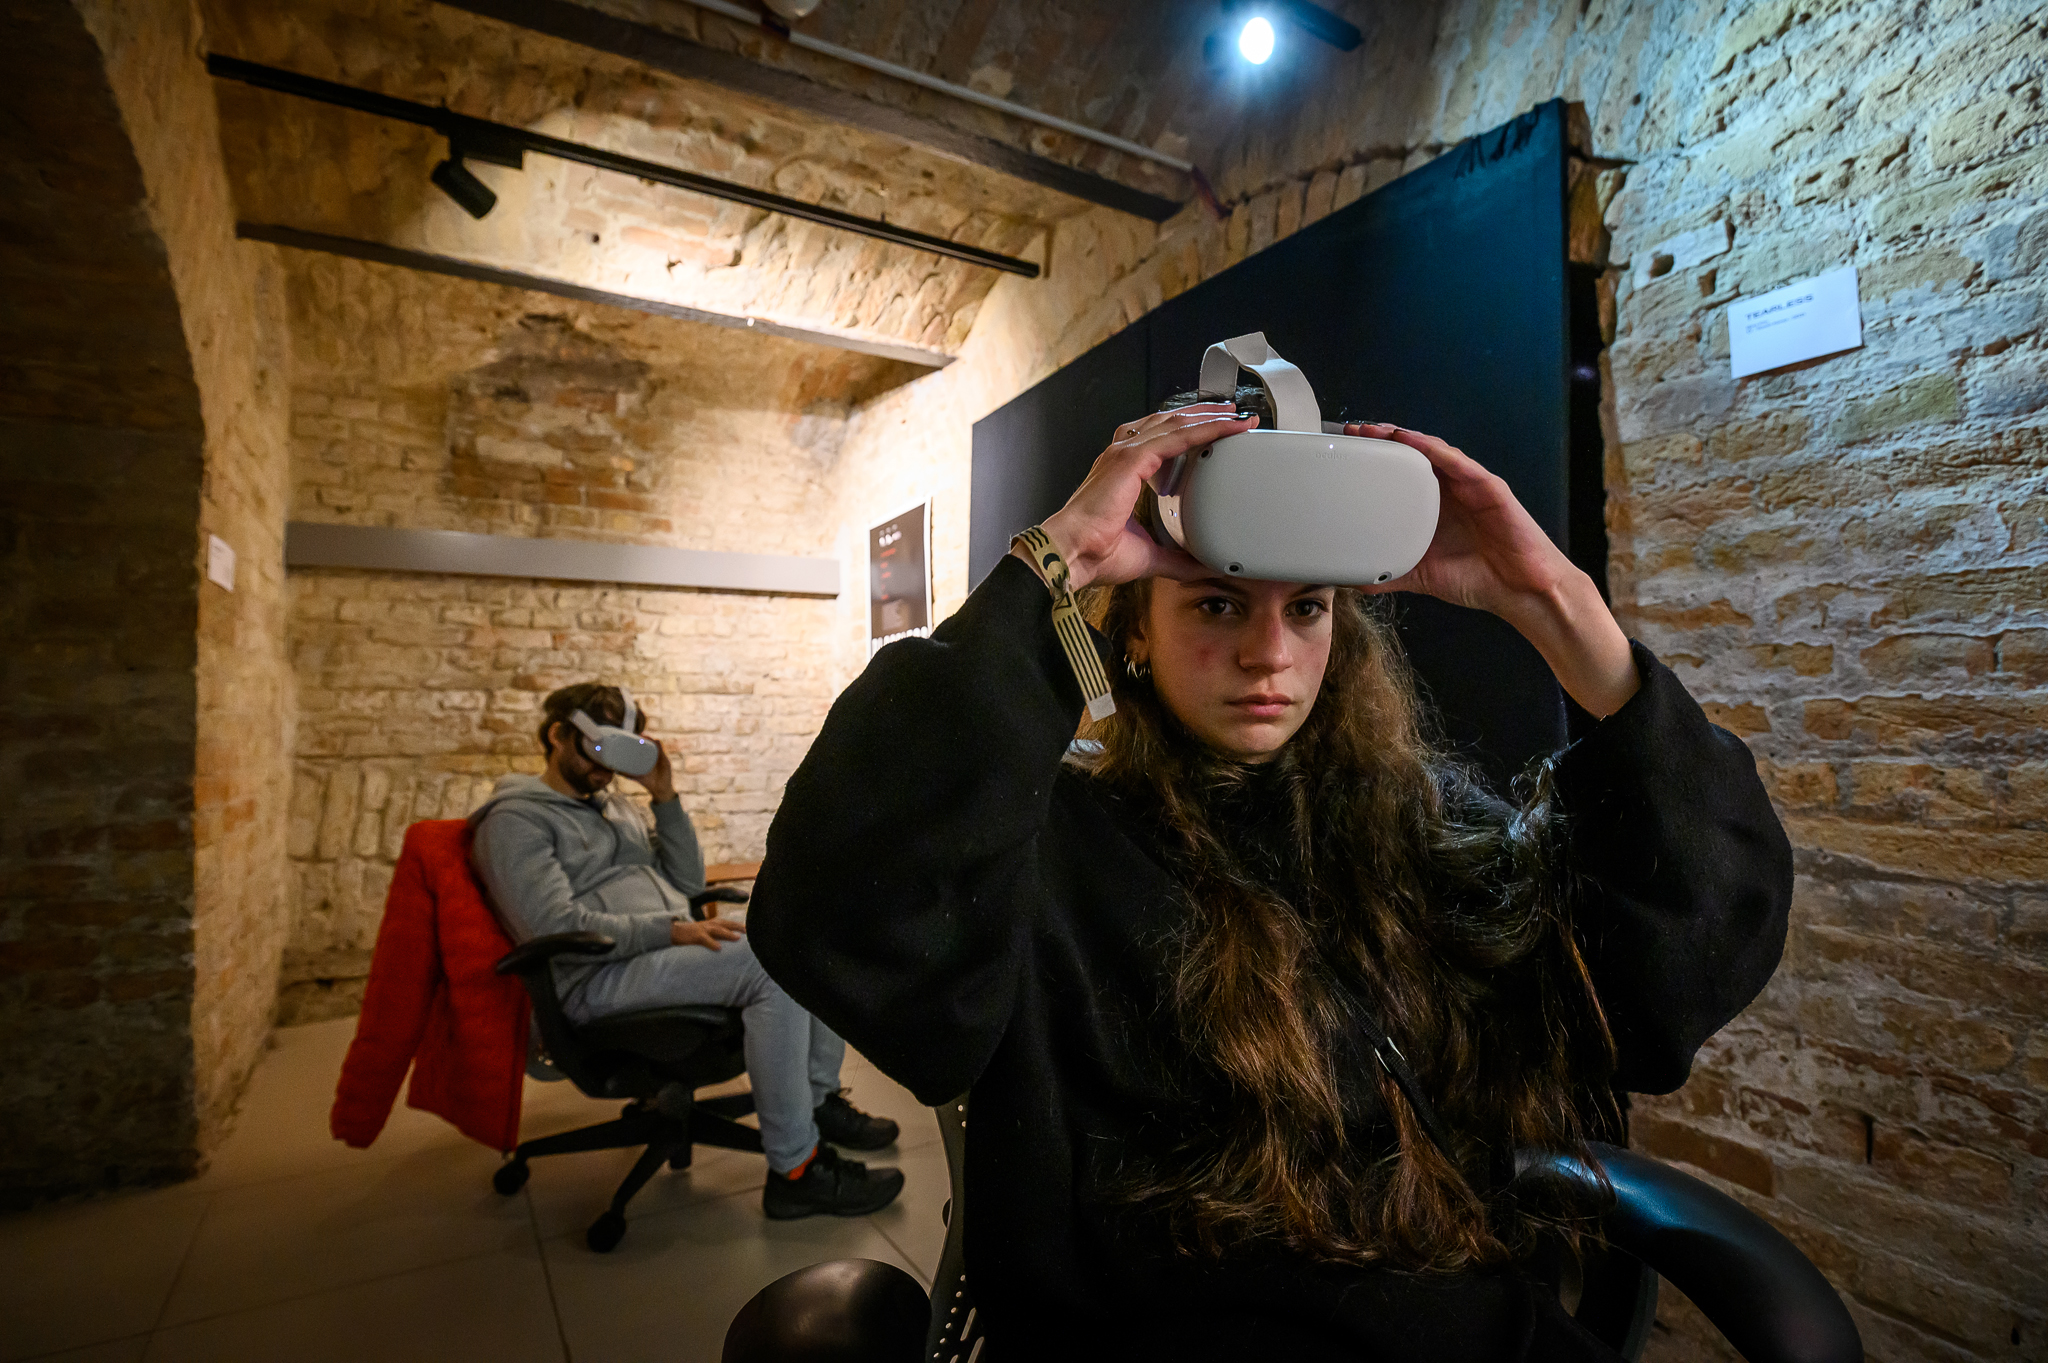 girl putting on a virtual reality headset and a man watching a VR film in the background